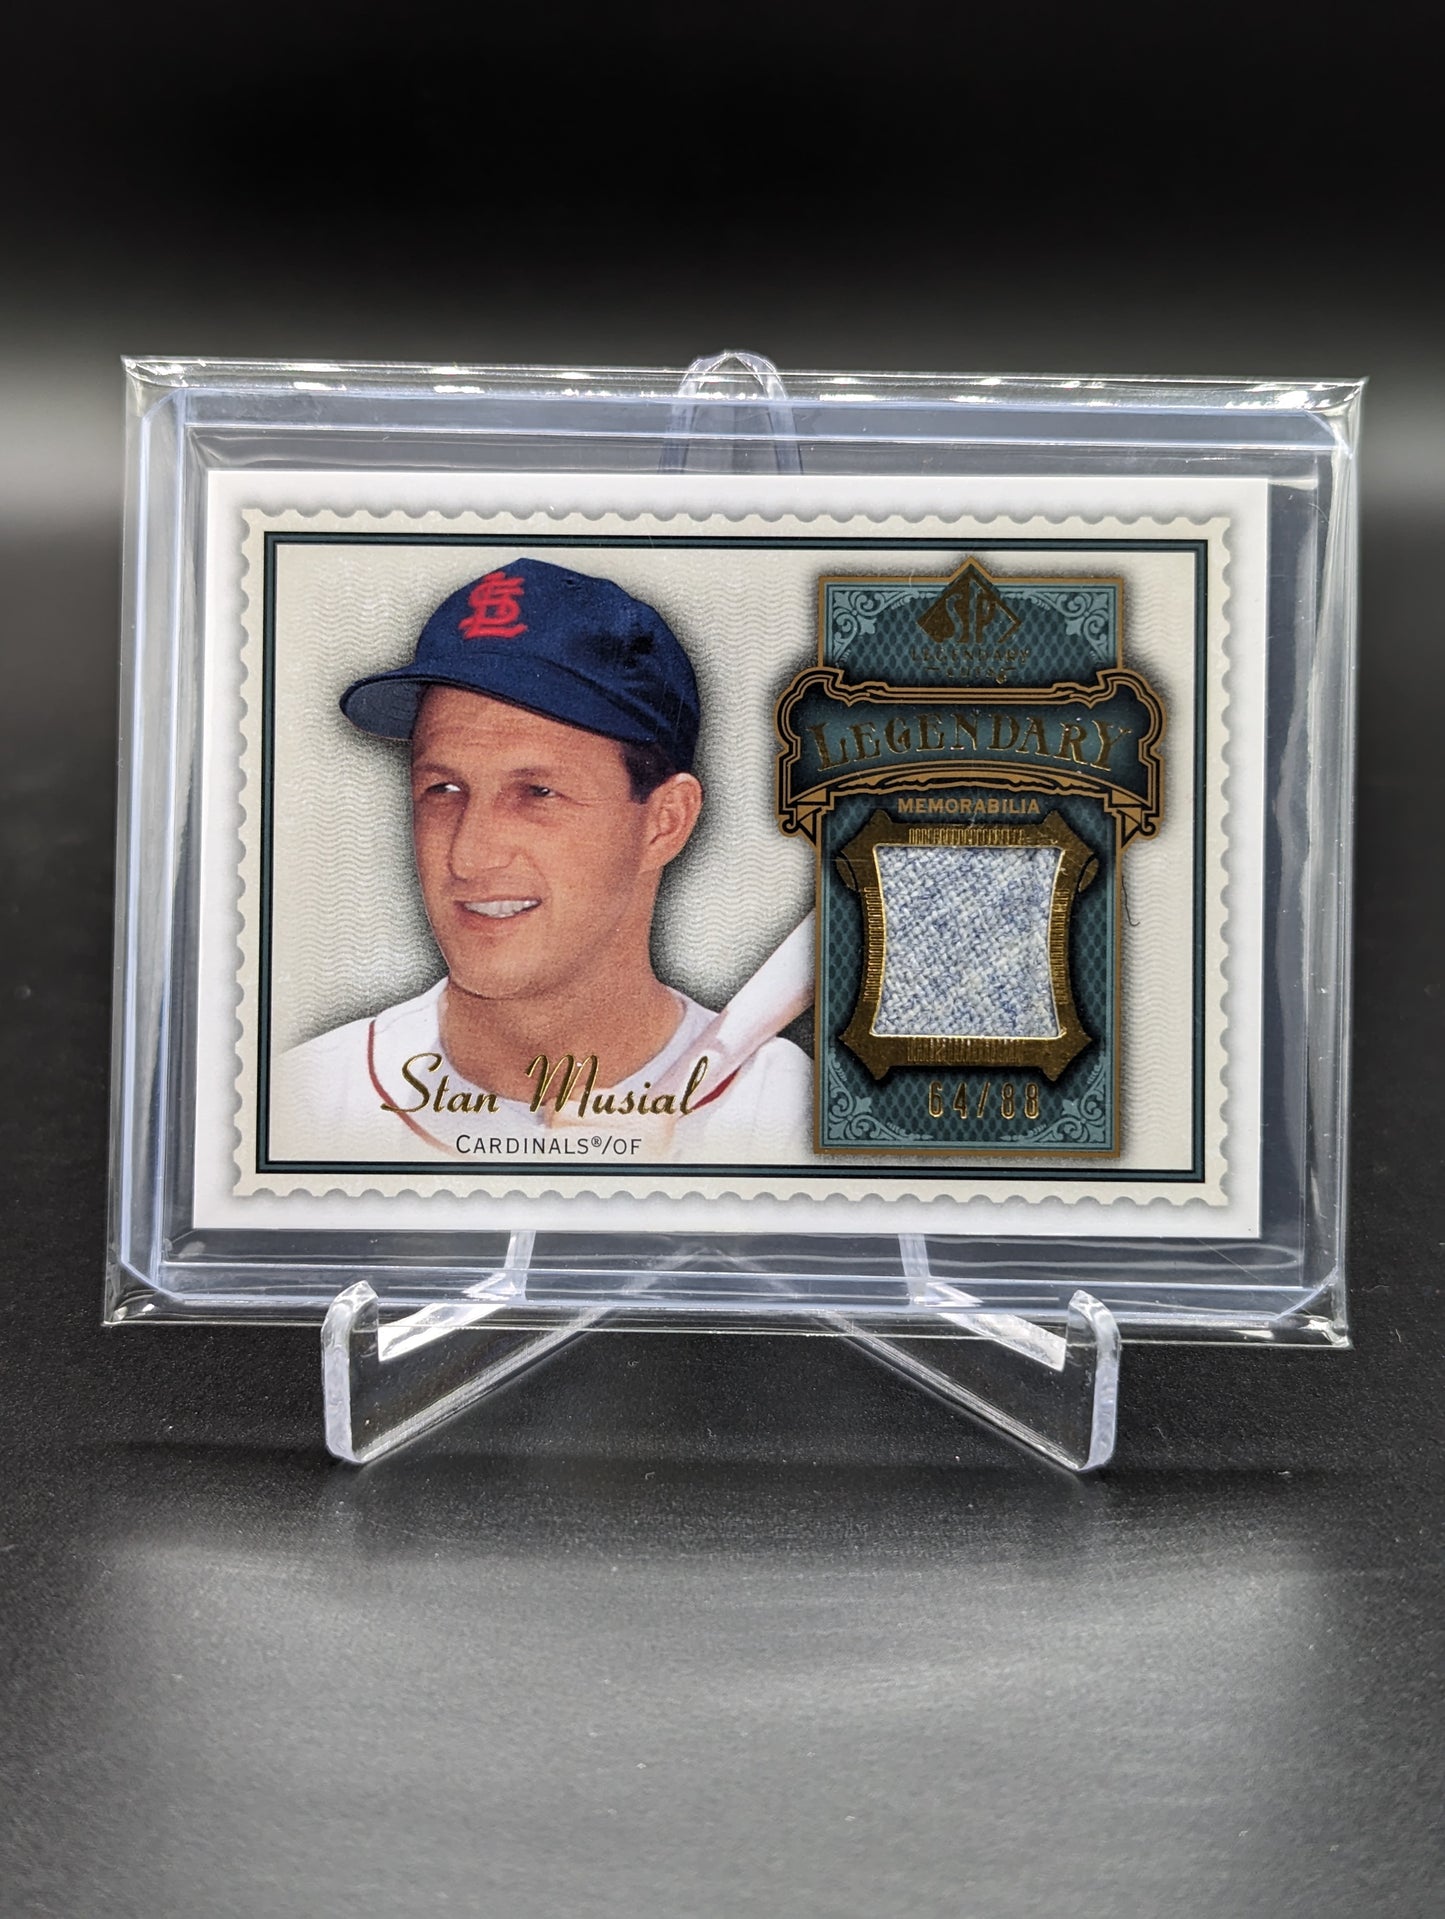 2009 SP Legendary Game Used #LM-SM2 Stan Musial #/88 Cardinals